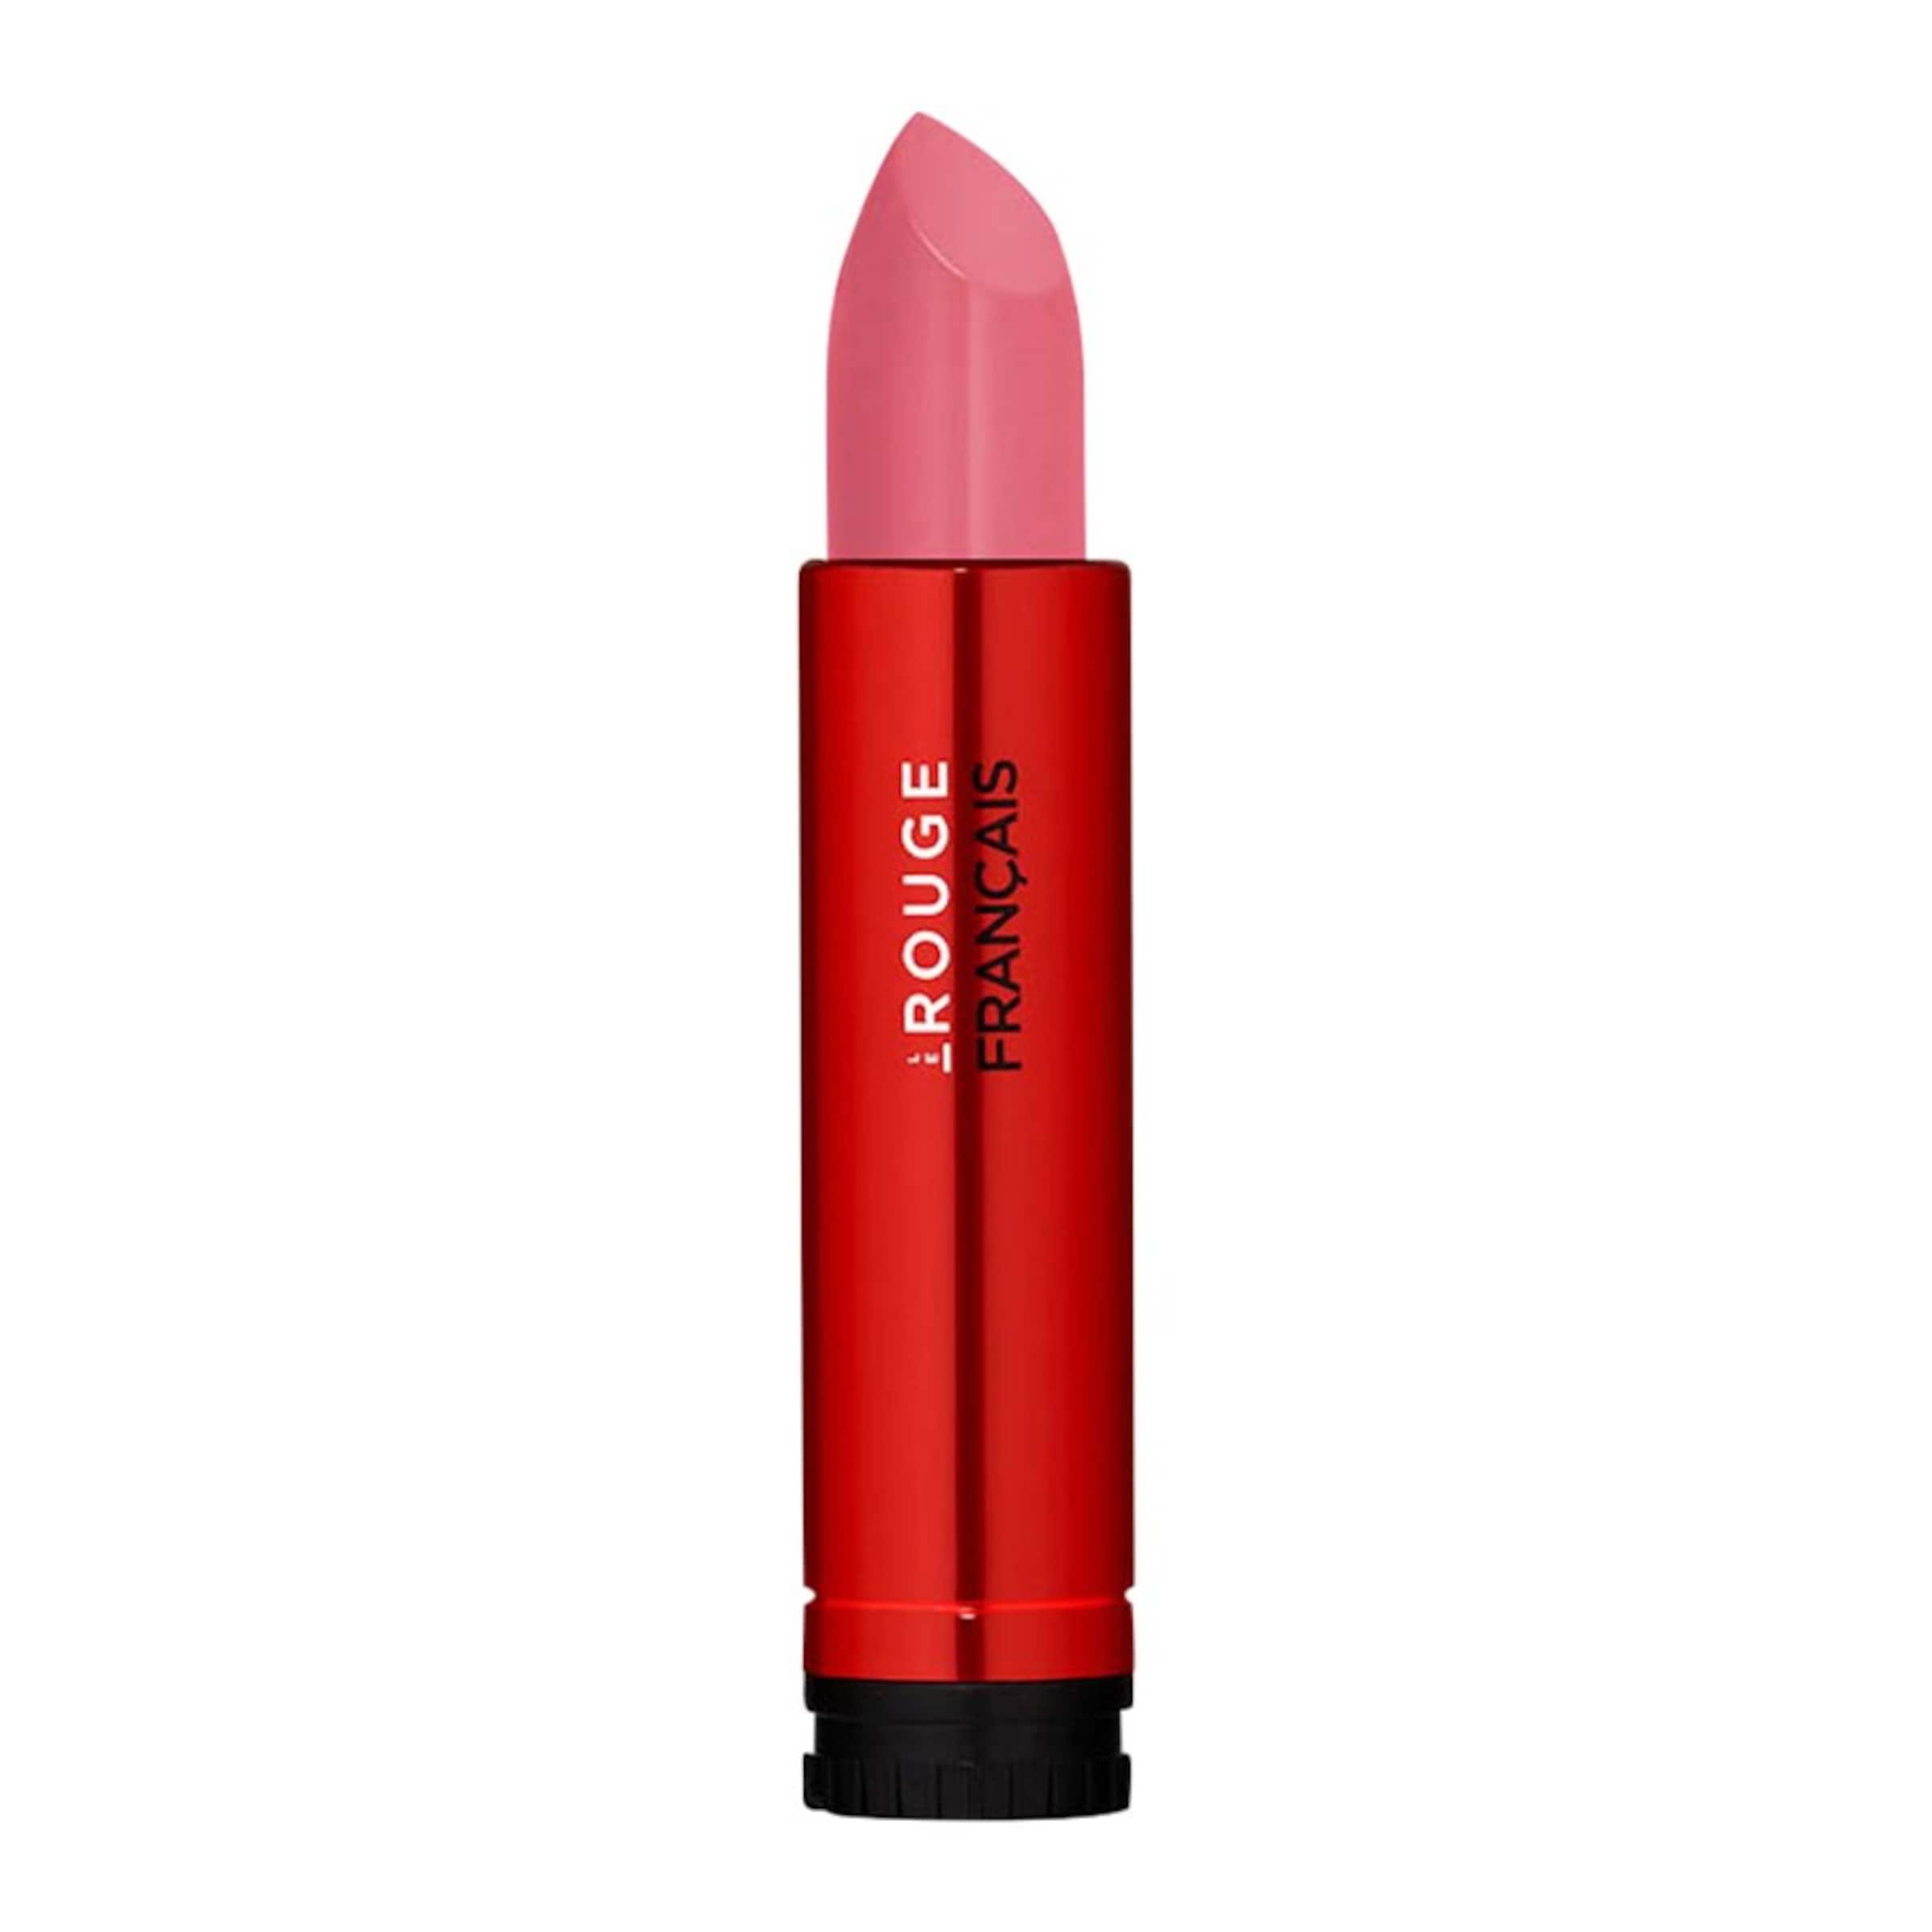 Le Rouge Francais Lippenstift Le Nude Refill in Pink 